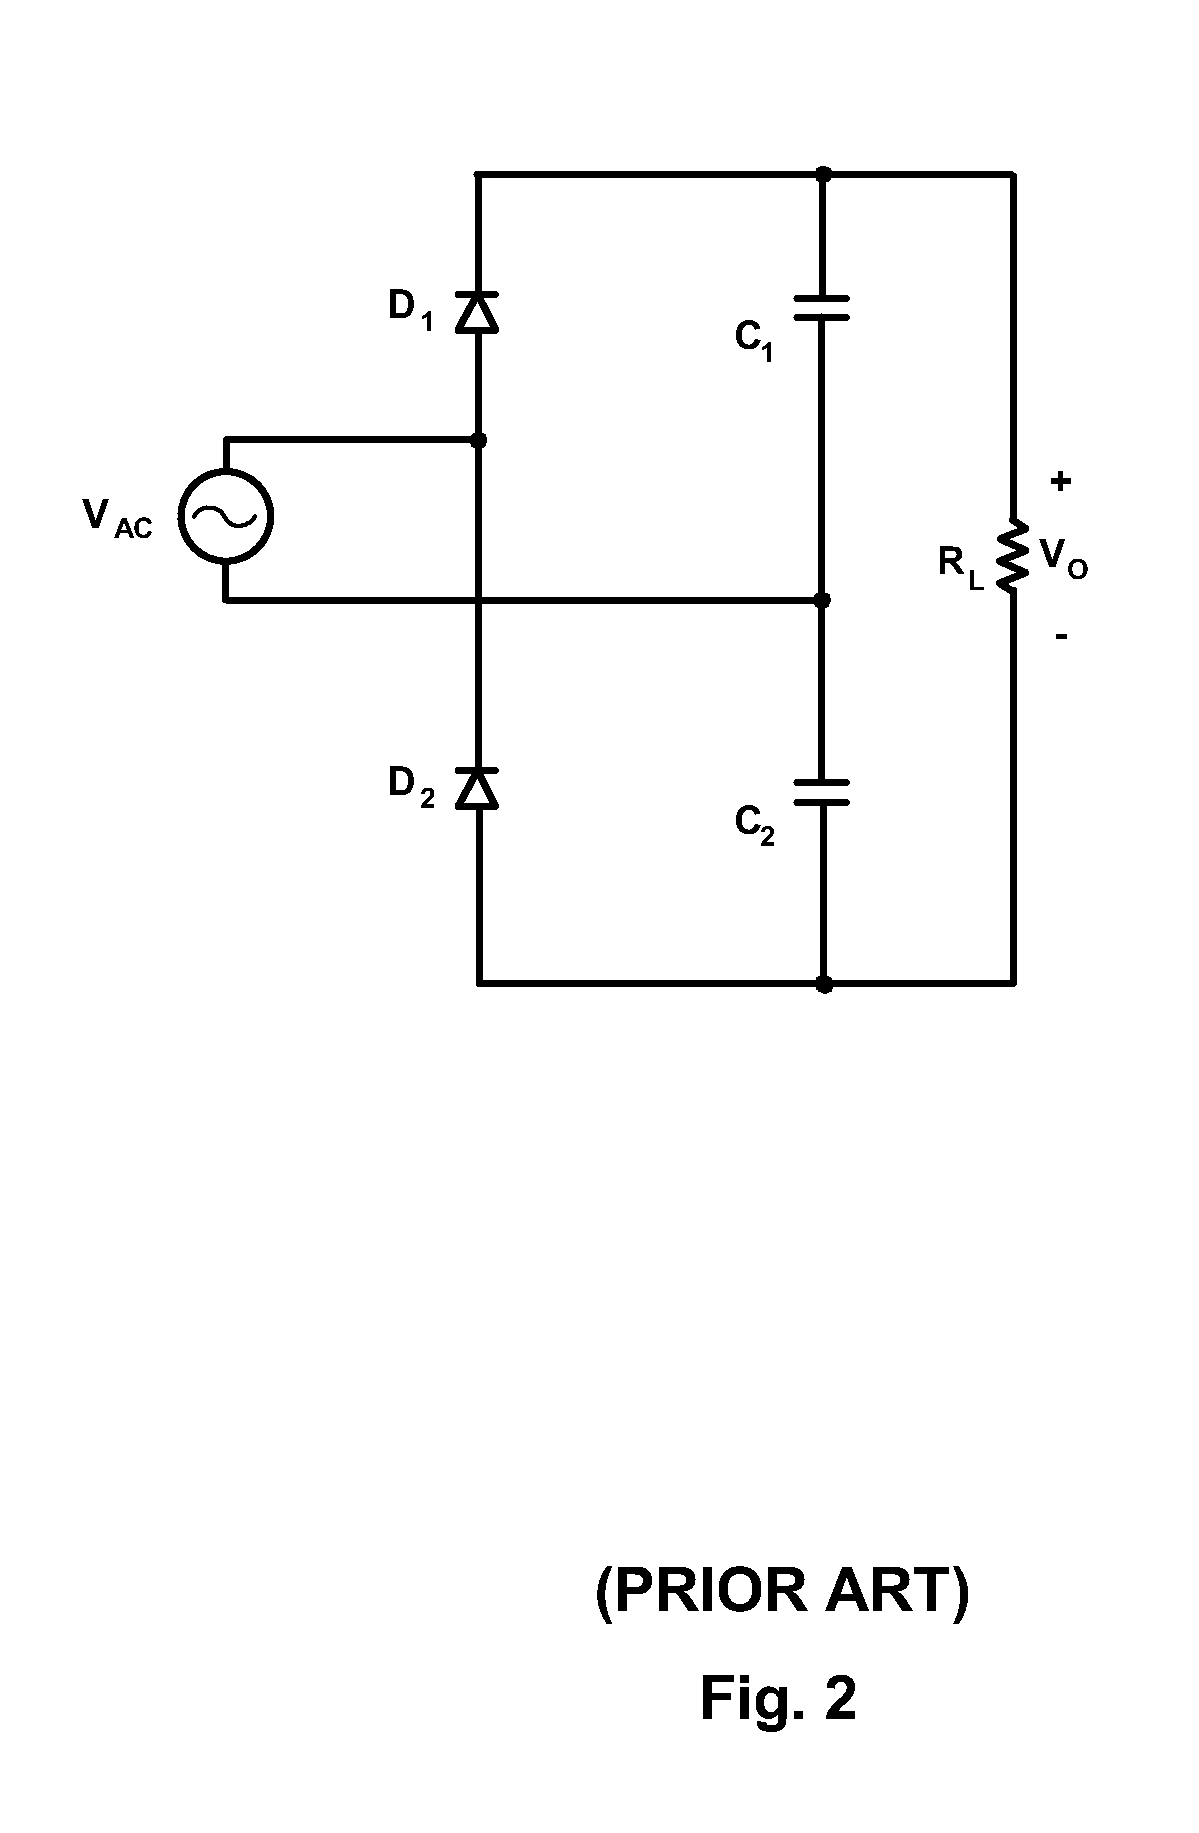 Power factor correction rectifier that operates efficiently over a range of input voltage conditions